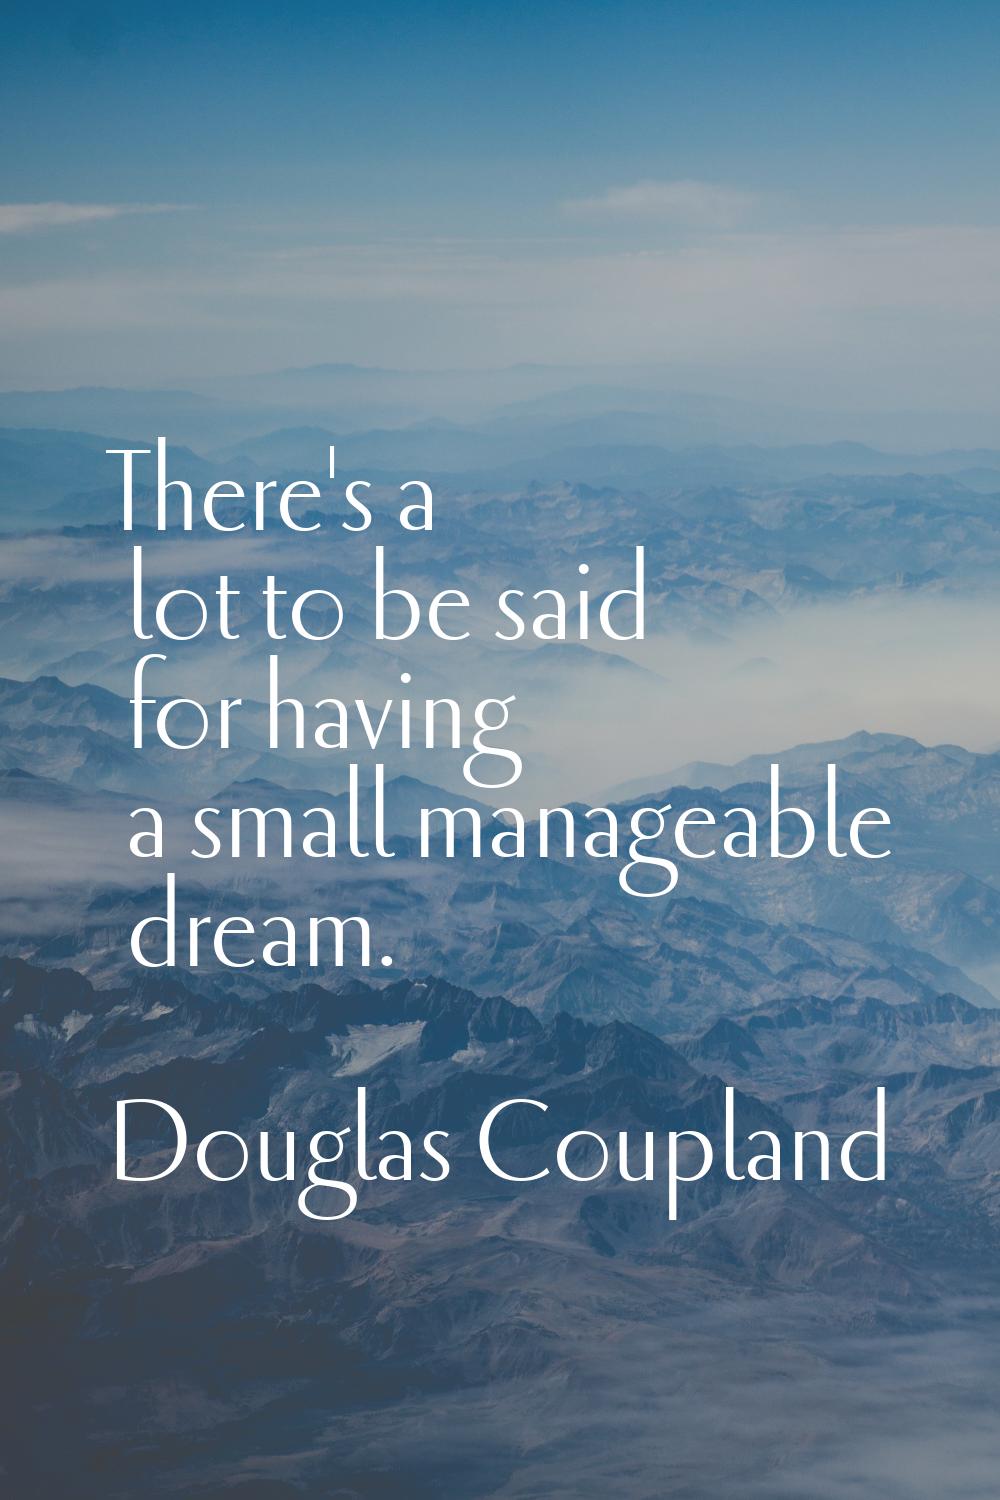 There's a lot to be said for having a small manageable dream.